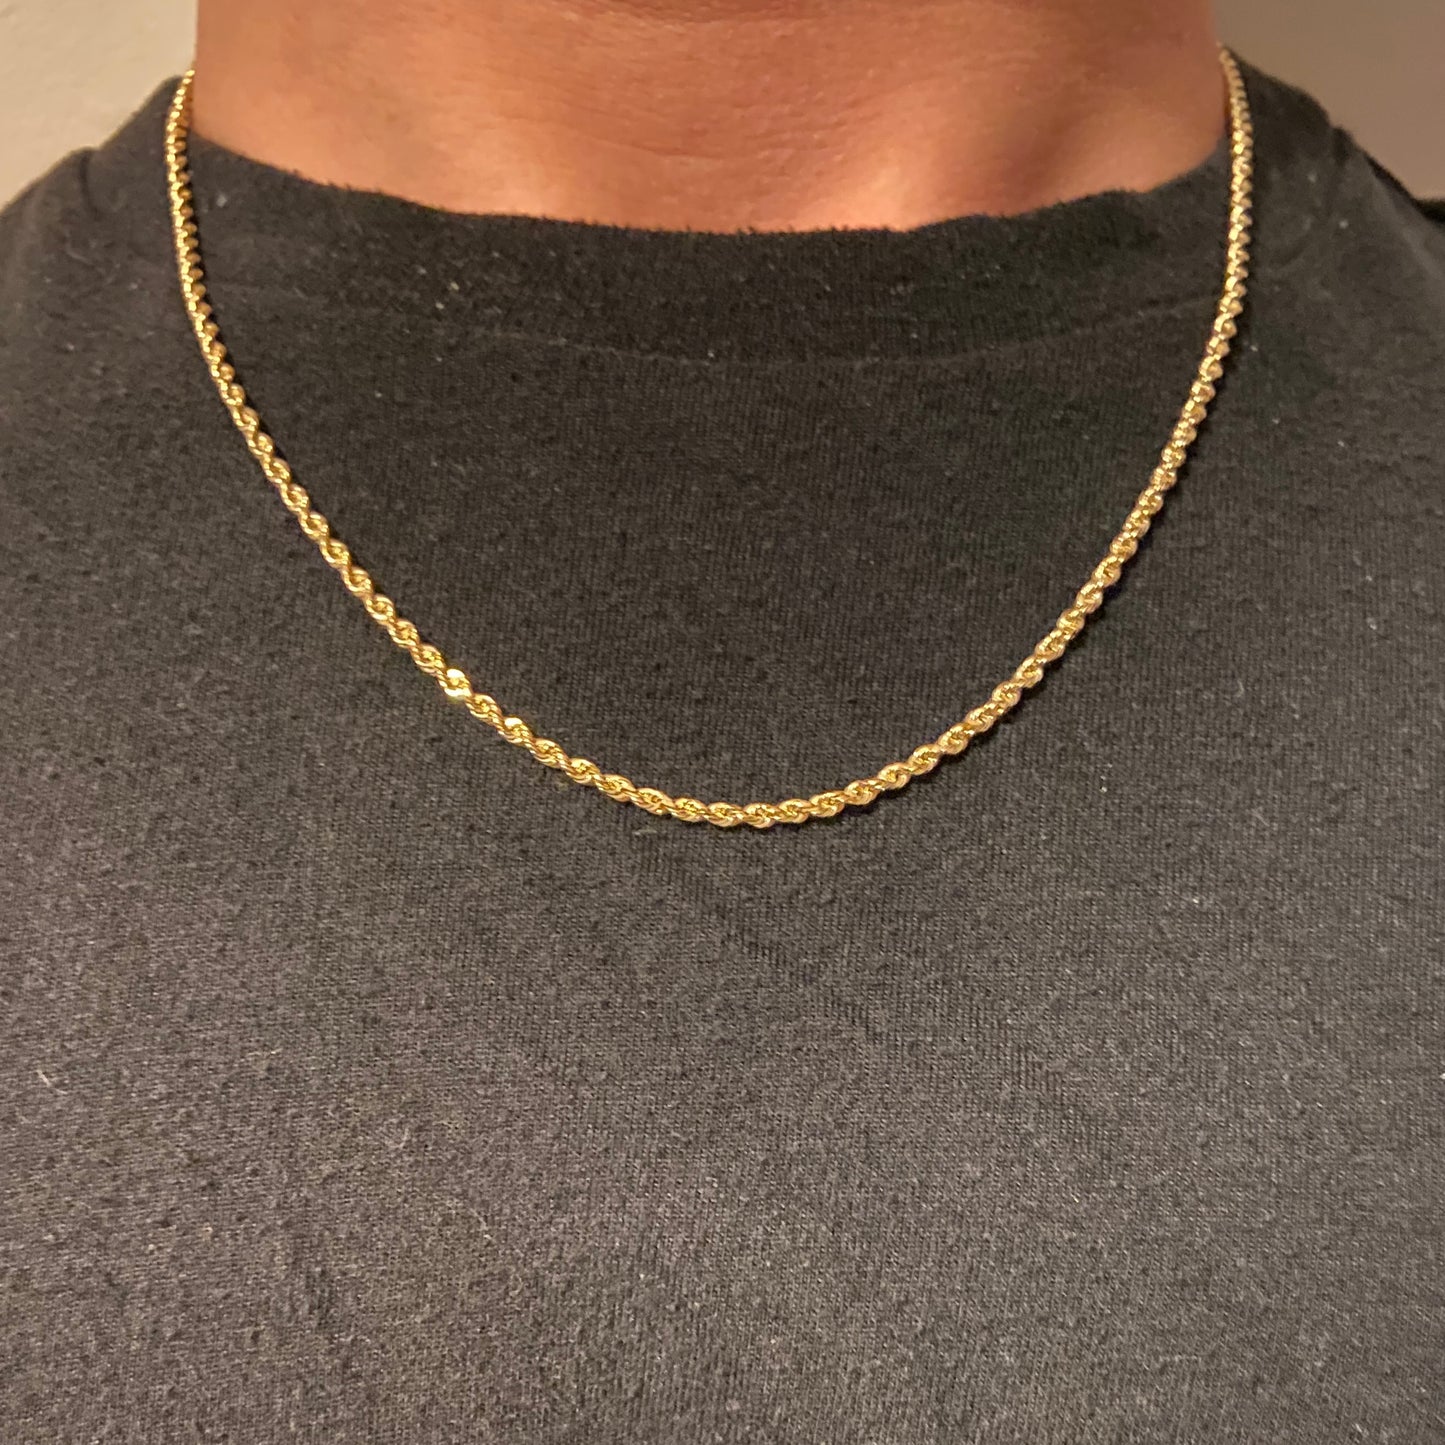 Solid Real 10k Gold Rope Chain 20in 3mm